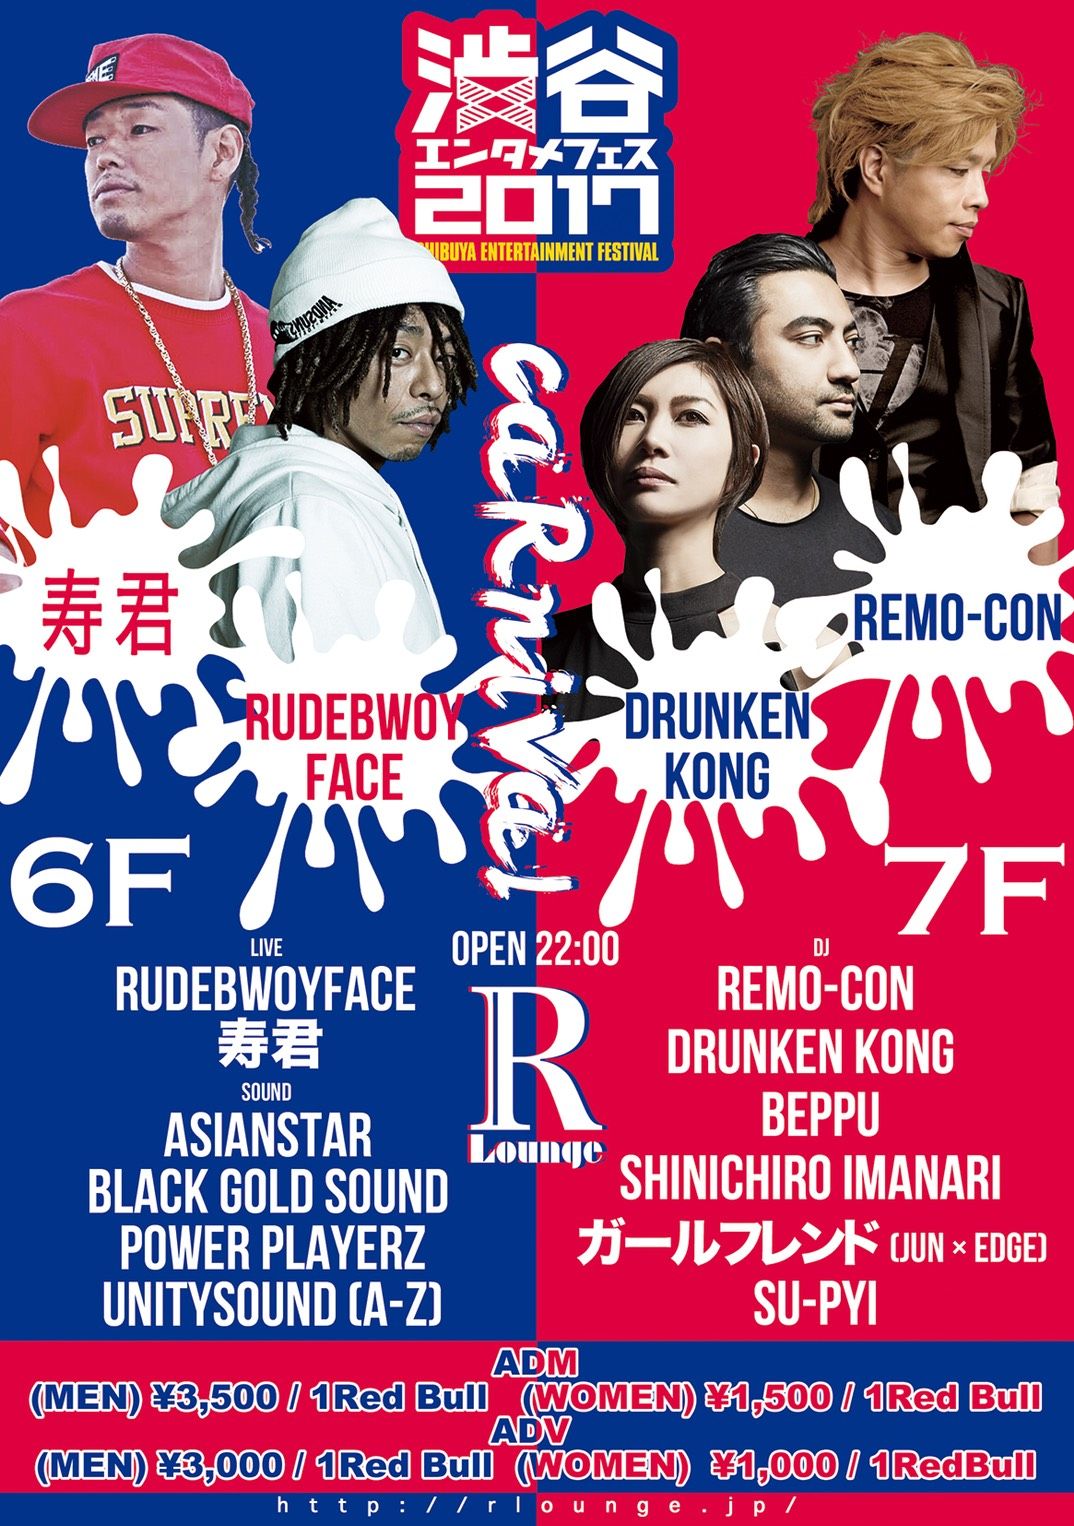 Red Bull Music Festival- 渋谷エンタメフェス Feat. caRnival (6F&7F)